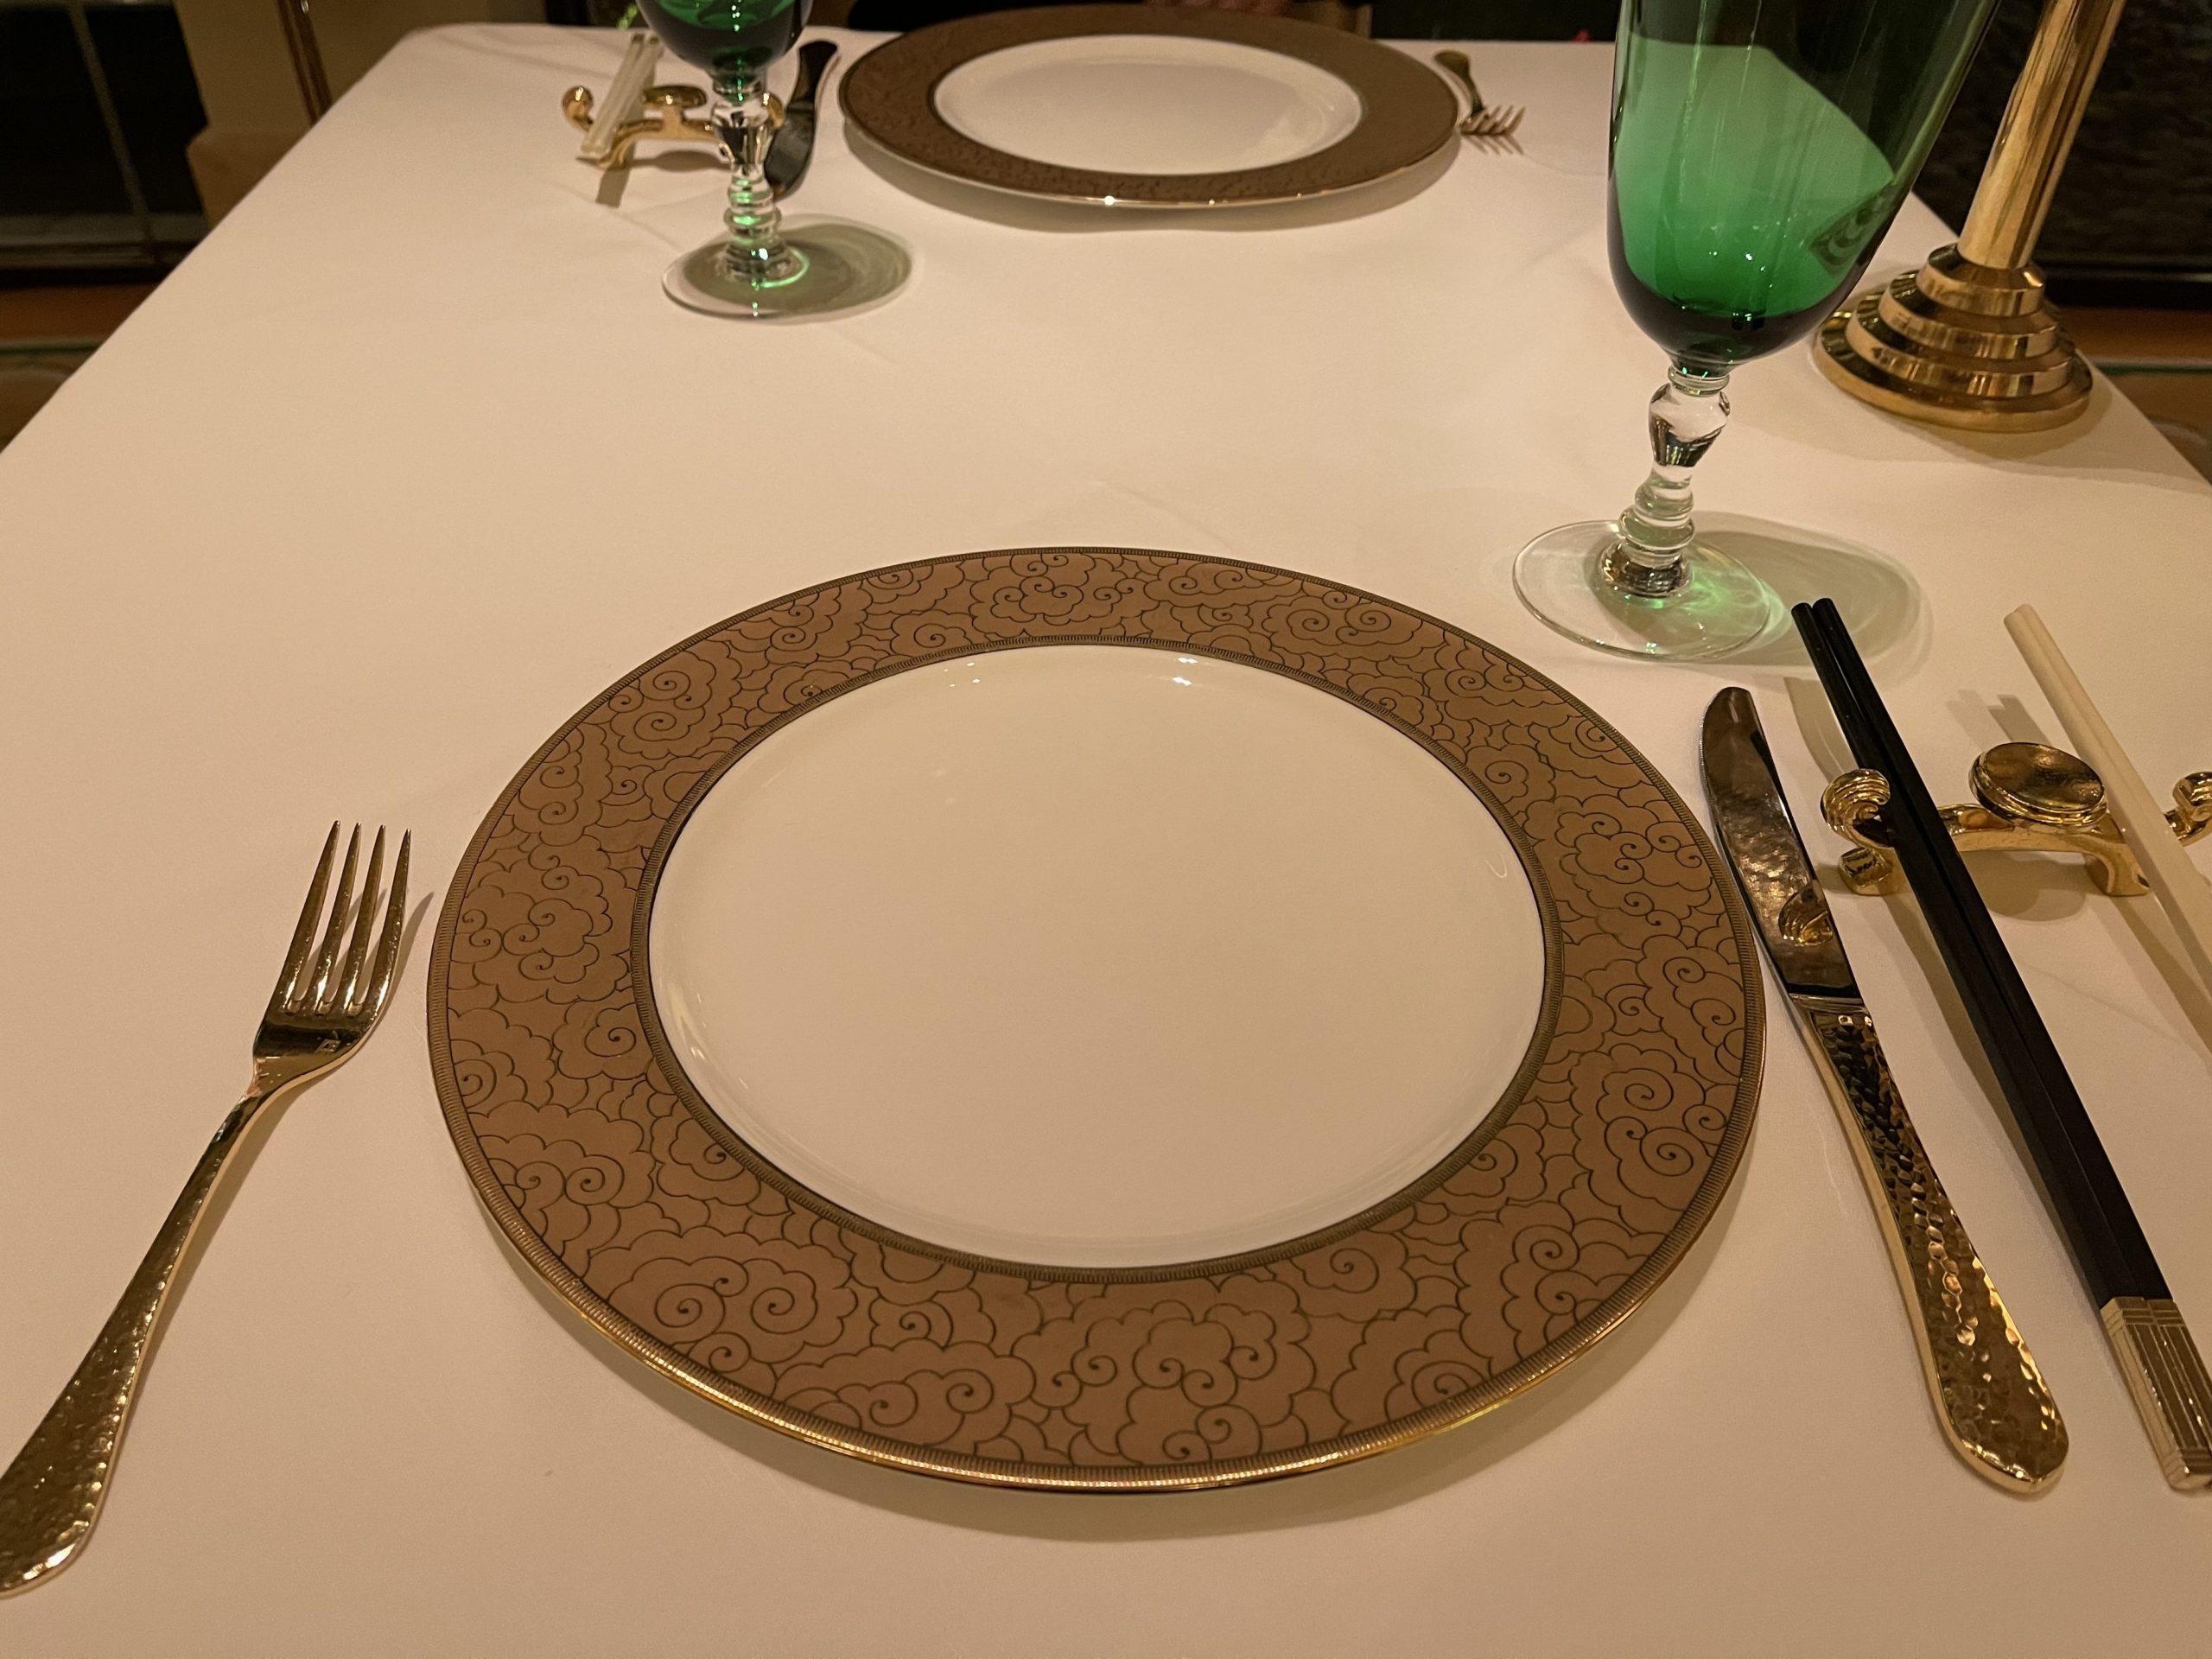 a plate with a gold rim and a gold rim on a table with a green glass and a silverware